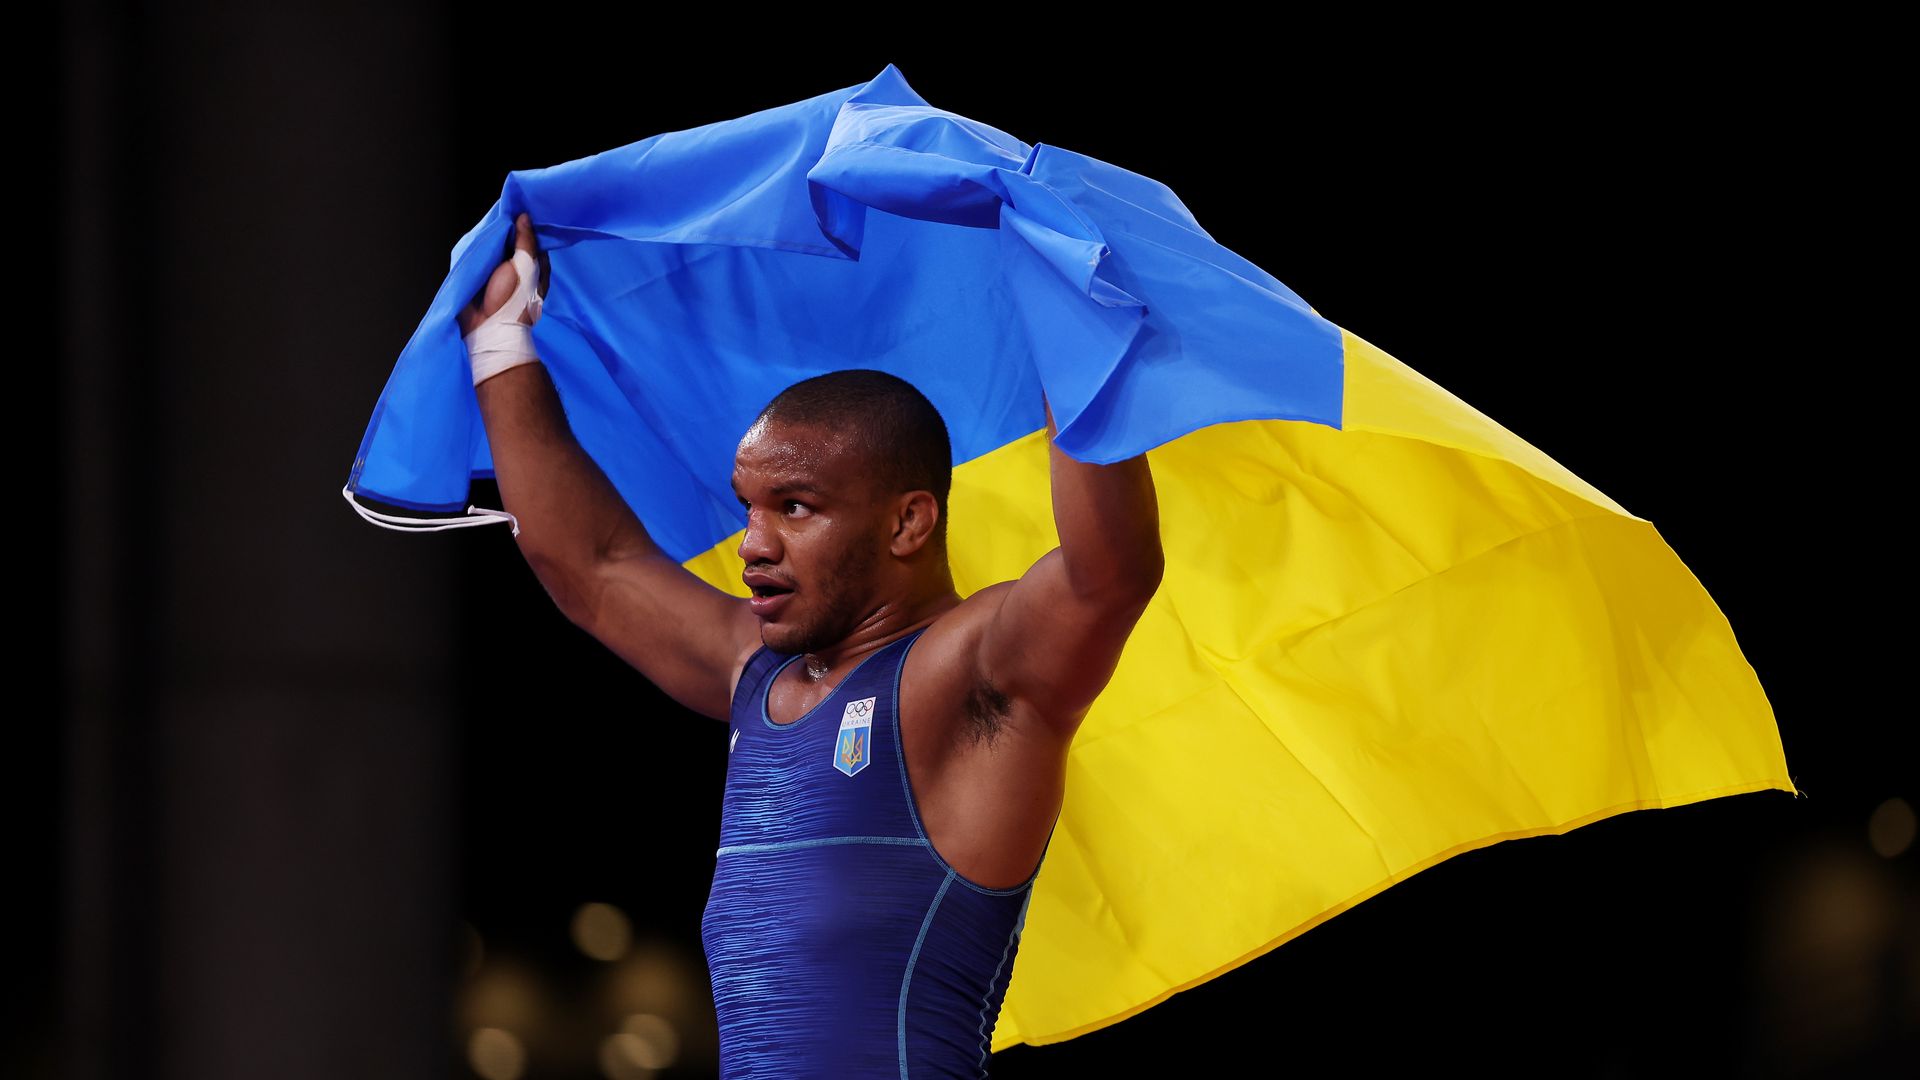 Afro-Ukrainian Zhan Beleniuk of Team Ukraine celebrates after winning his Men’s Greco-Roman 87kg Gold Medal Match at the Tokyo 2020 Olympic Games.